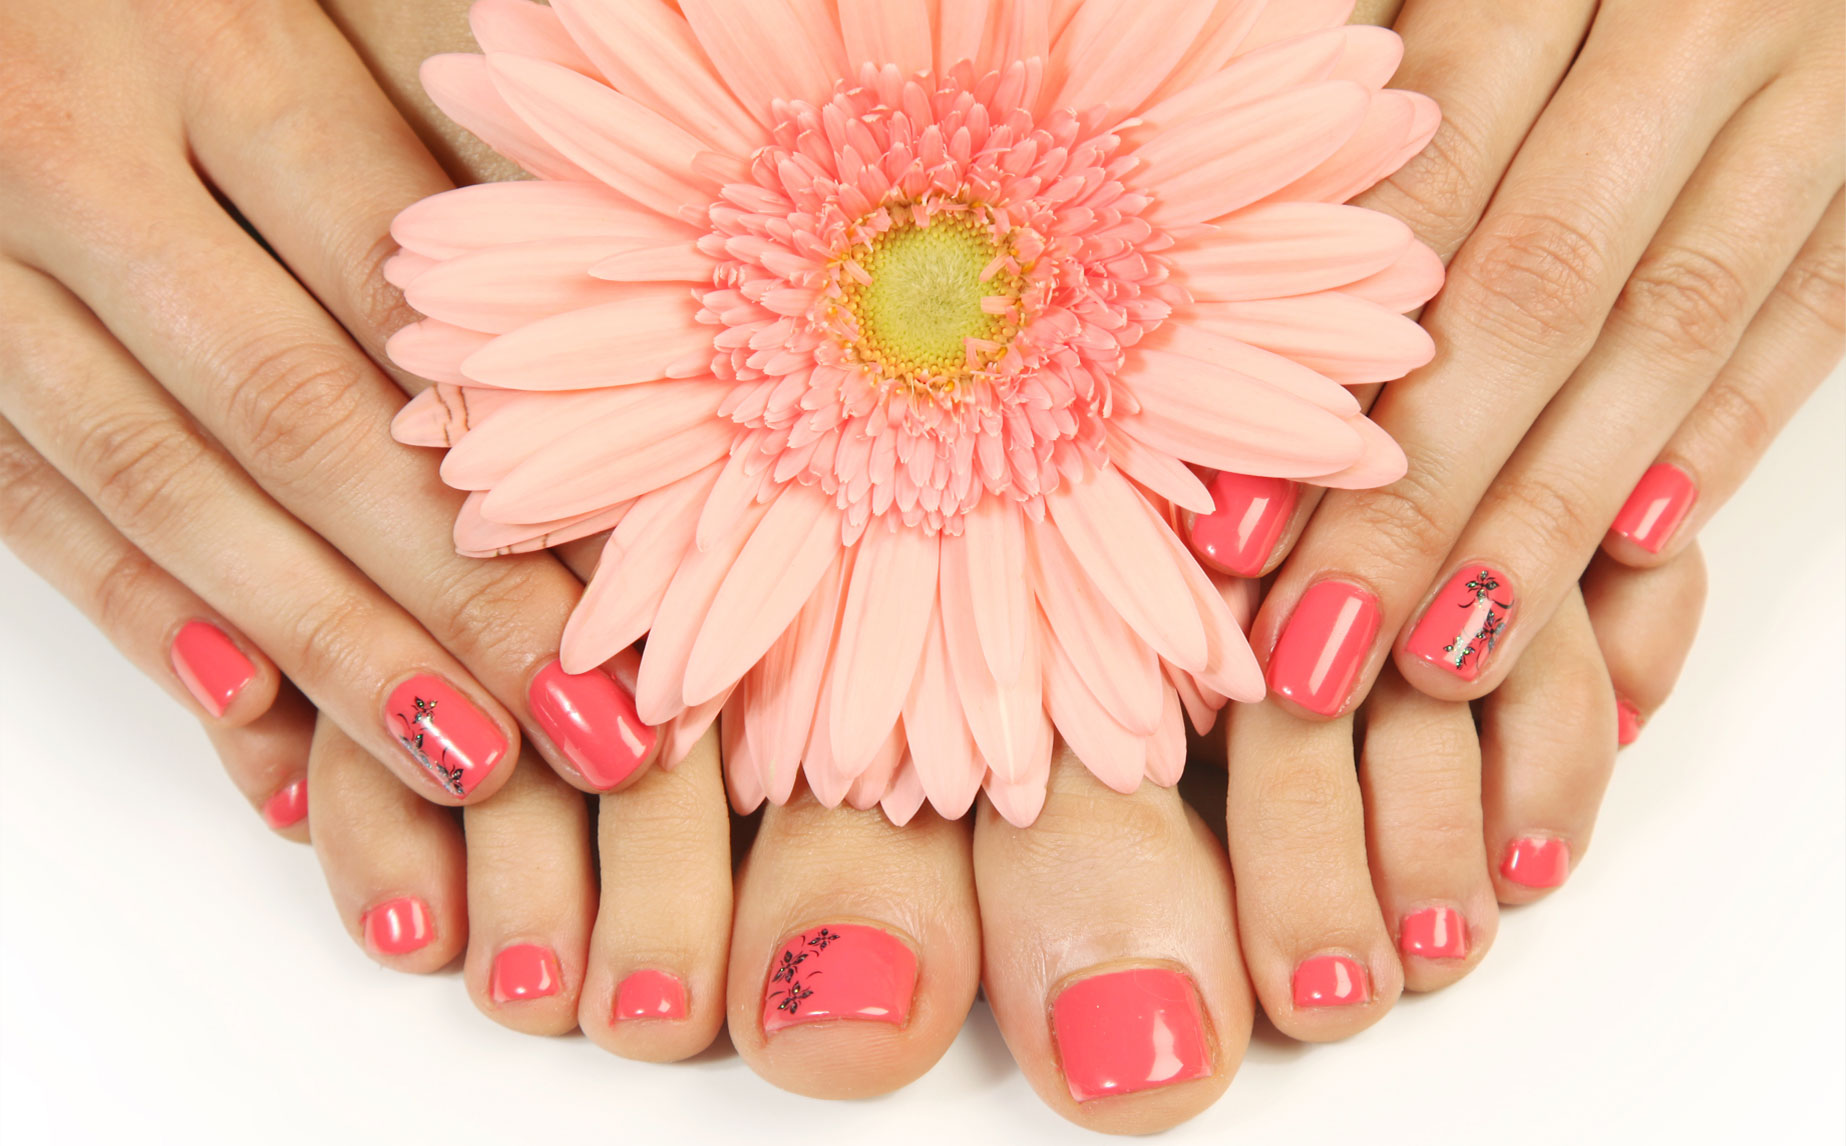 How Much Are Manicure And Pedicure?